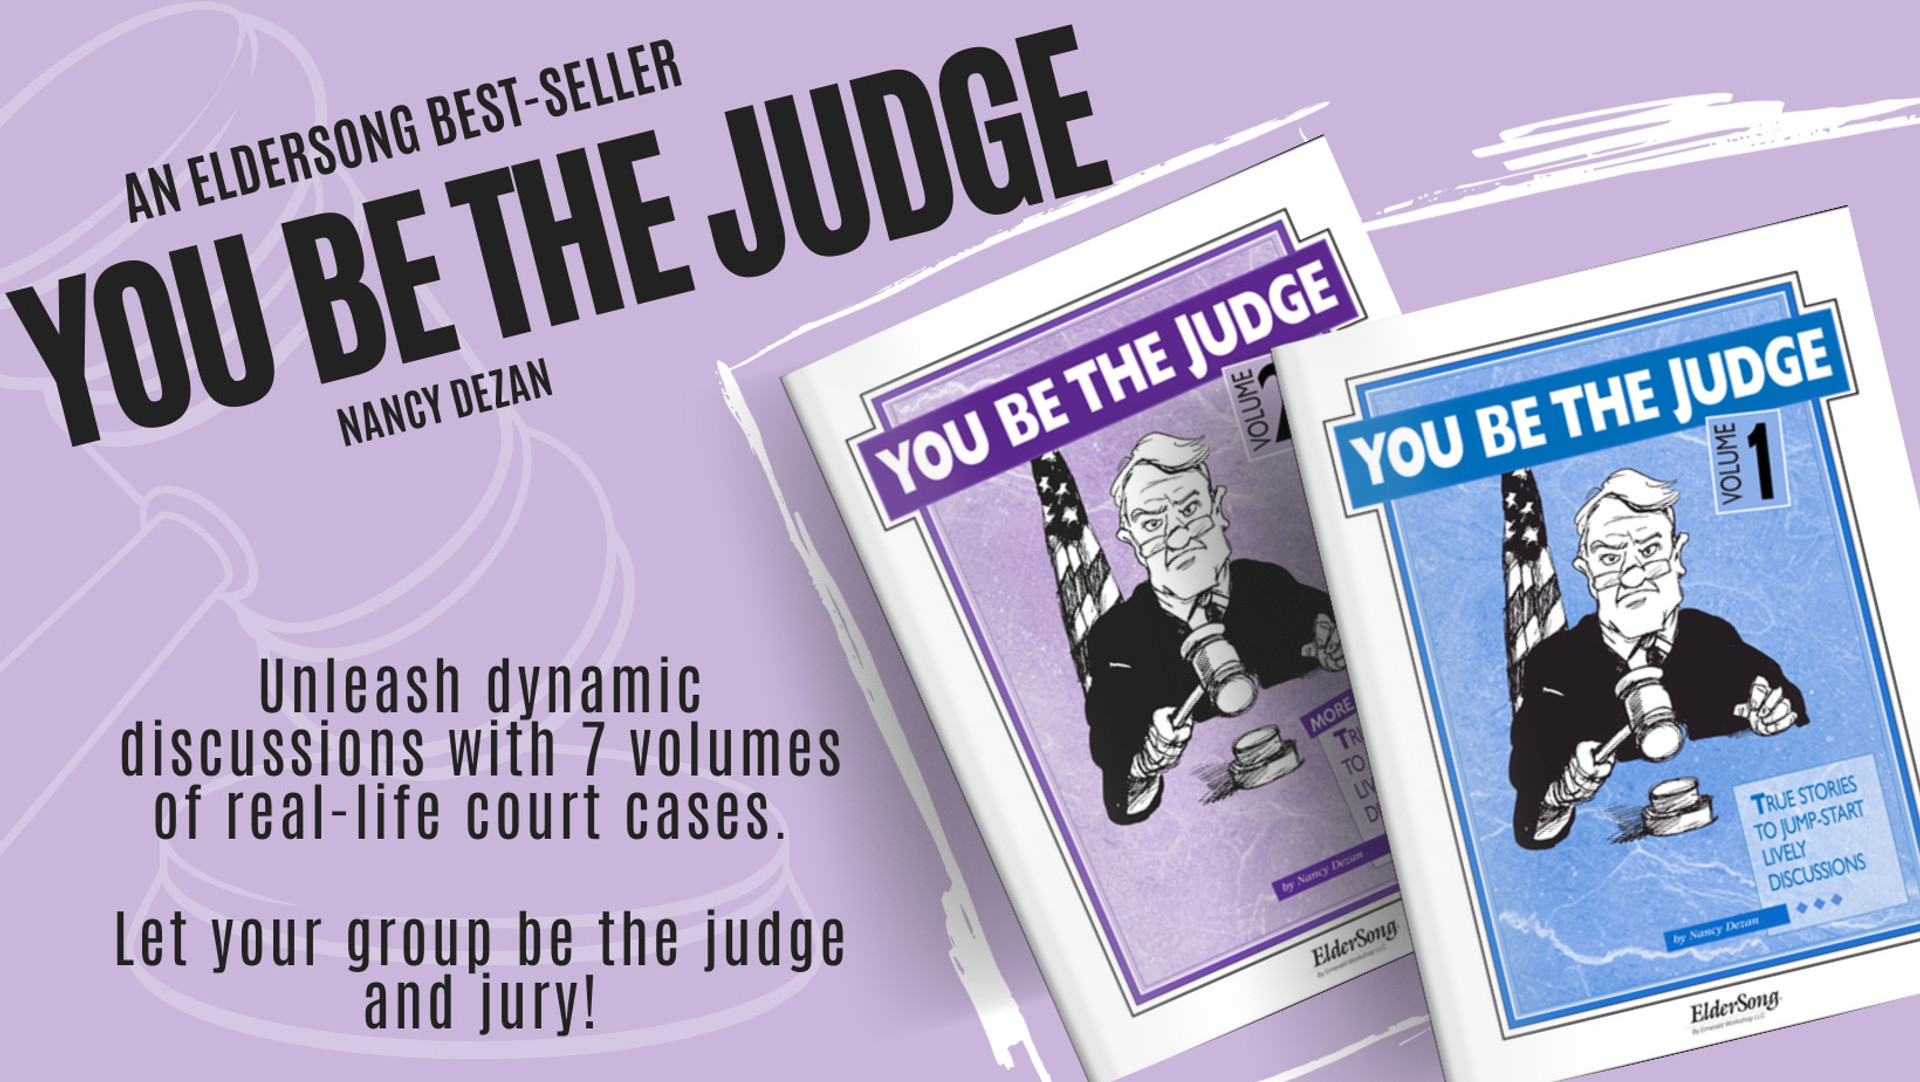 YOU BE THE JUDGE by Nancy Dezan: Unleash dynamic discussions with 7 volumes of real-life court cases. An ElderSong Best-Seller!